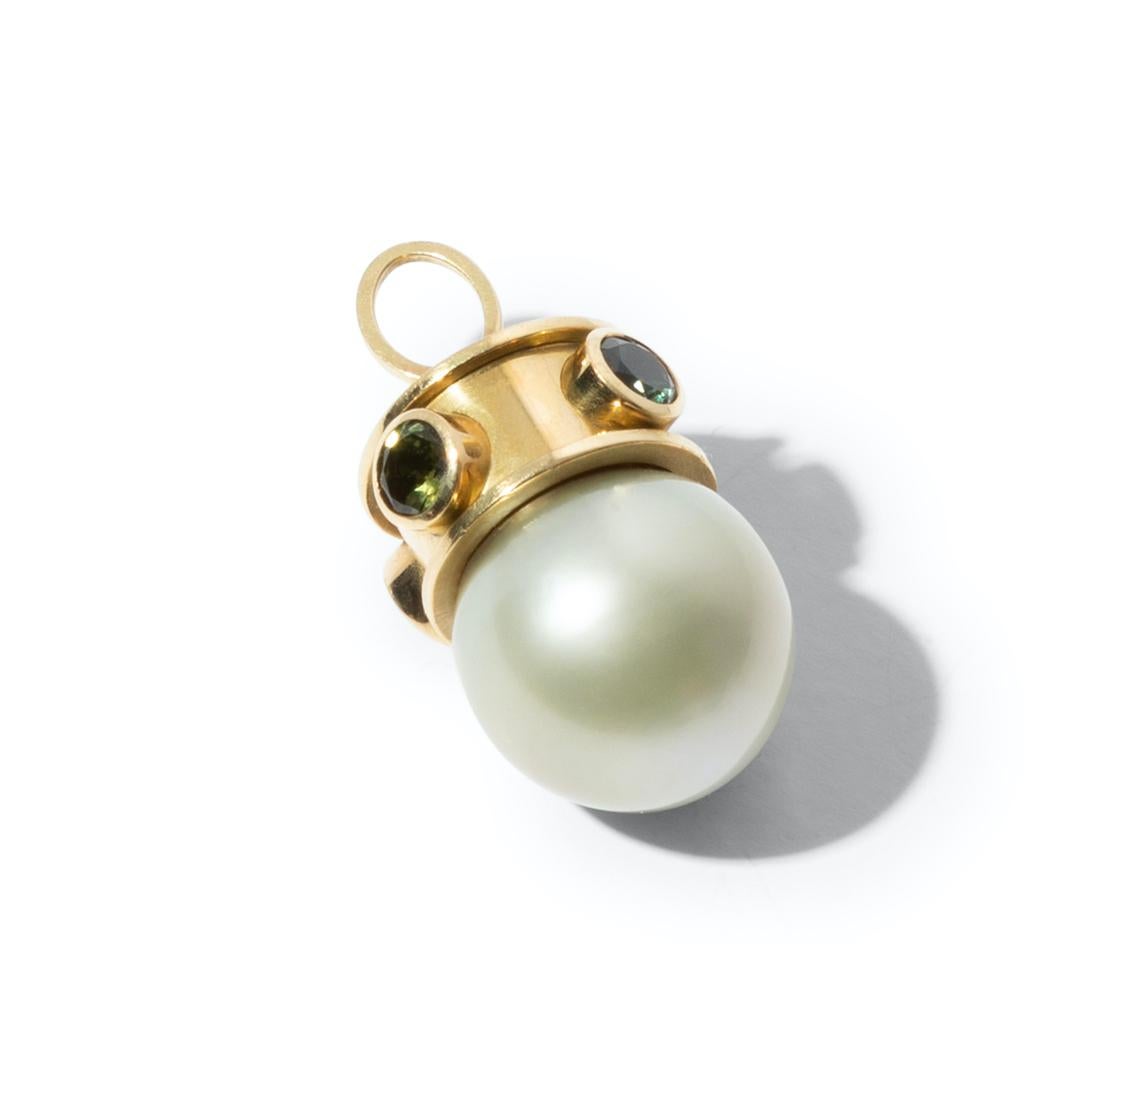 Unique 18k gold pendant with a large silver grey Tahiti pearl and four sapphires in tonal shades of green. An intriguing combination of shape and colour, pearl and gemstone. Wear it on a short or long necklace to add some mystique to your